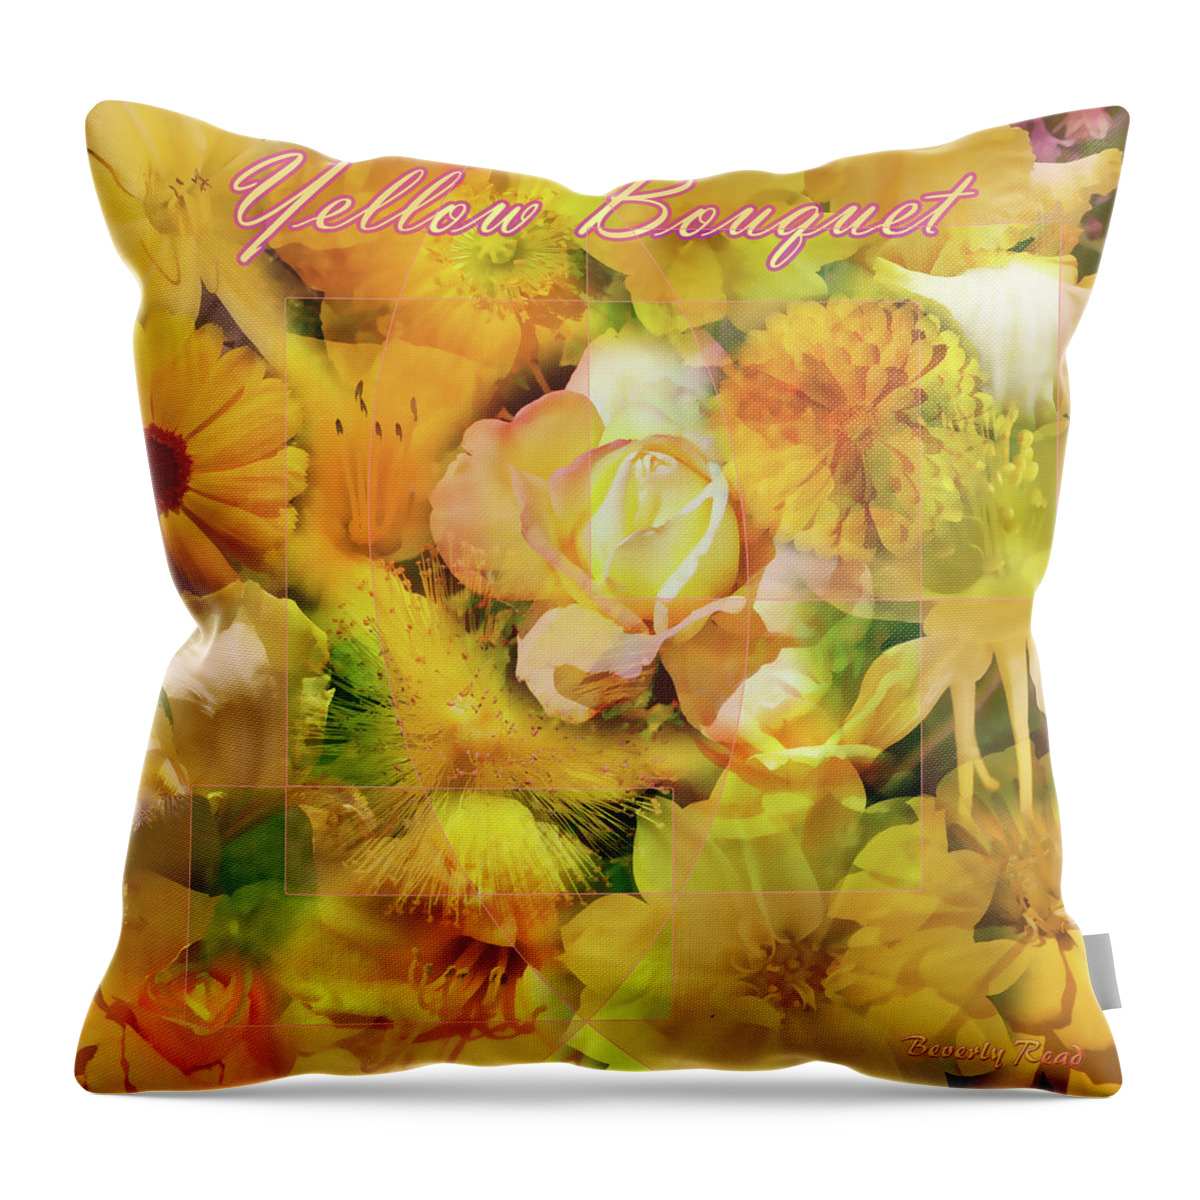 Photograph Throw Pillow featuring the photograph Yellow Bouquet by Beverly Read